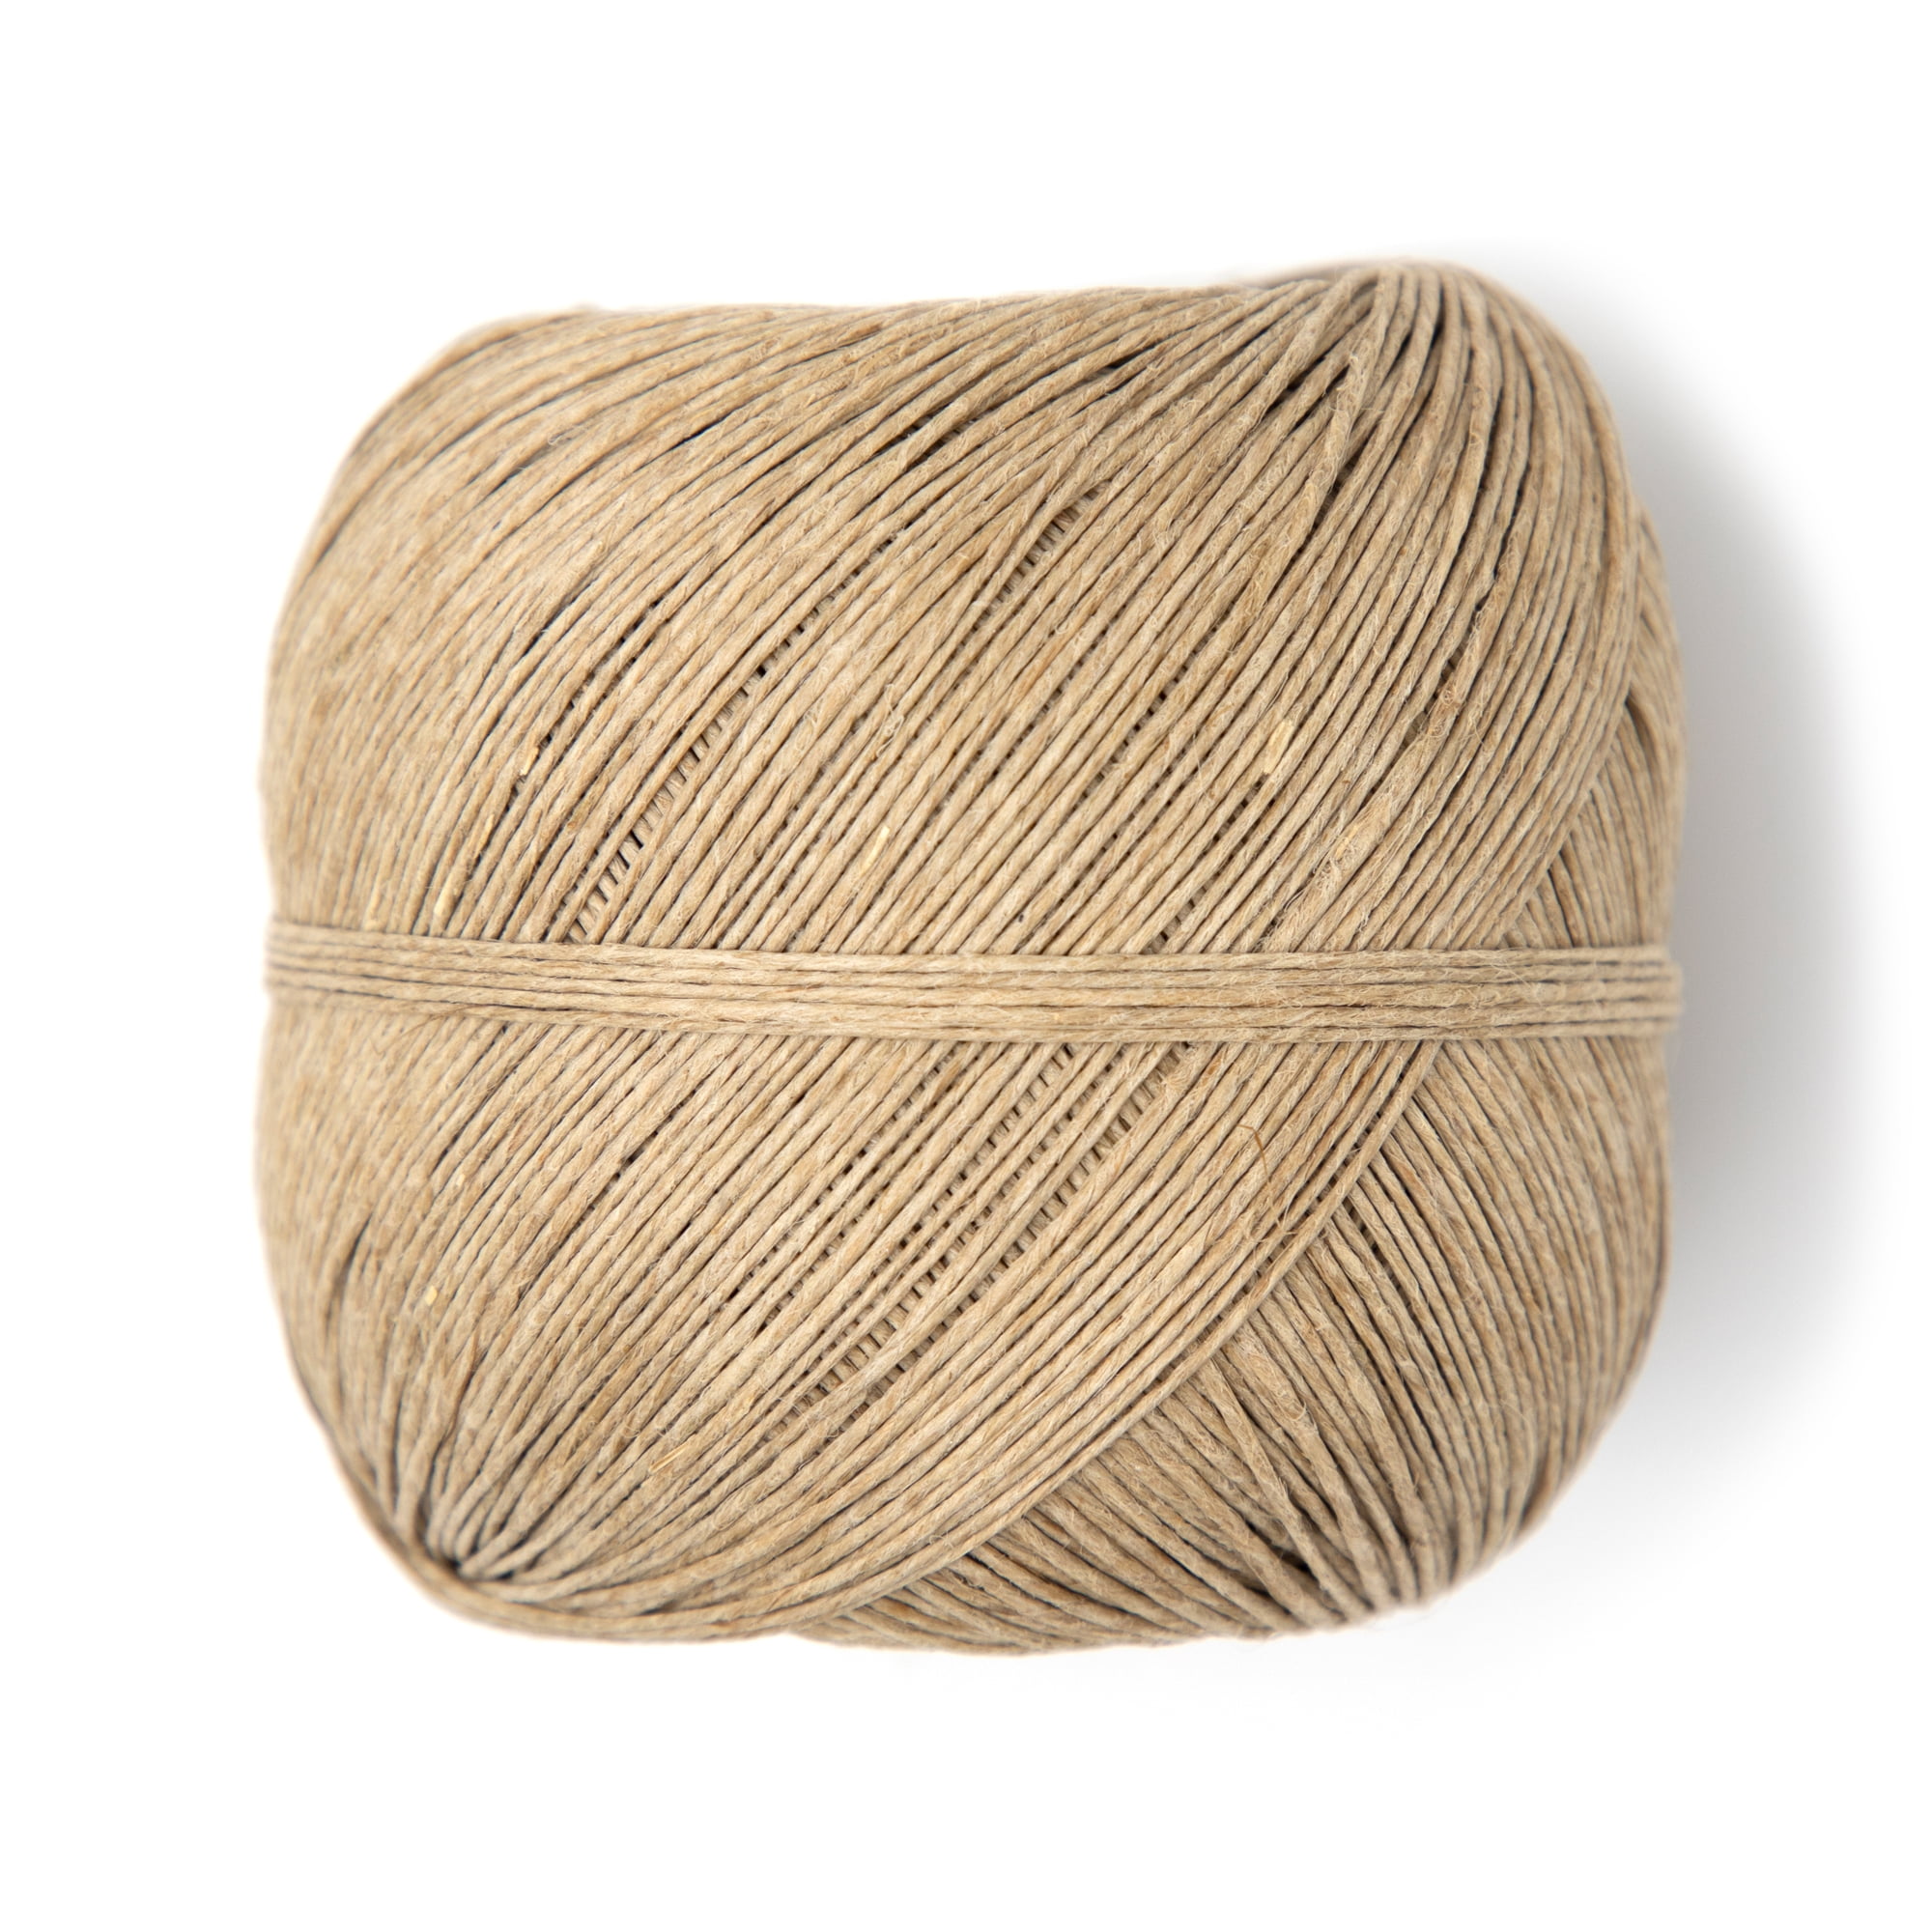 Thin Hemp Cord .5mm, Earth friendly Twine, Varigated Pastel Color, craft  supply